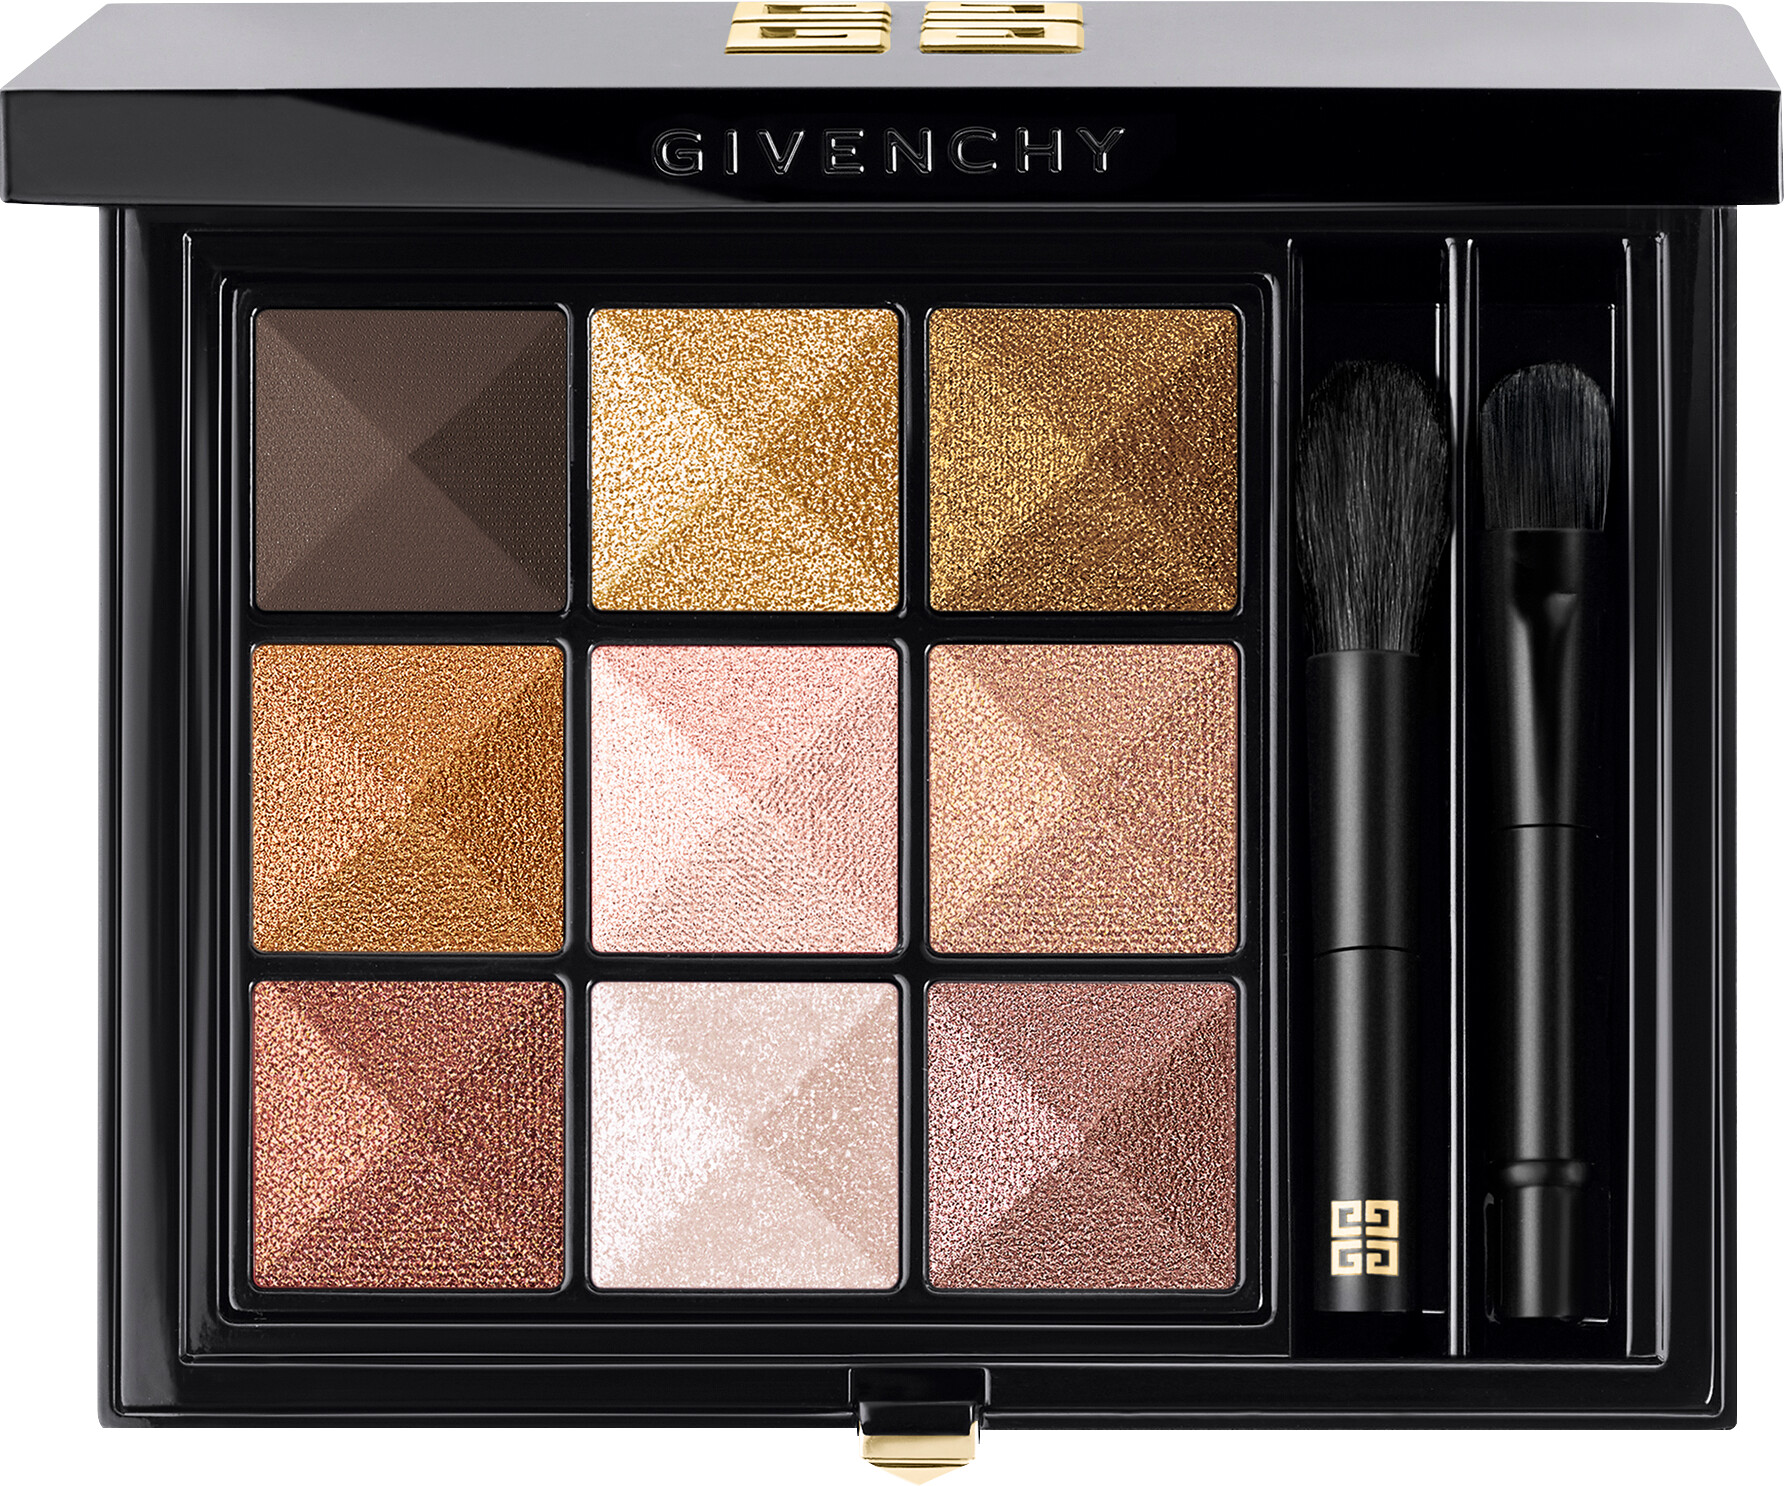 GIVENCHY Le 9 De Givenchy Eyeshadow Palette 8g Le 9.07 Limited Edition